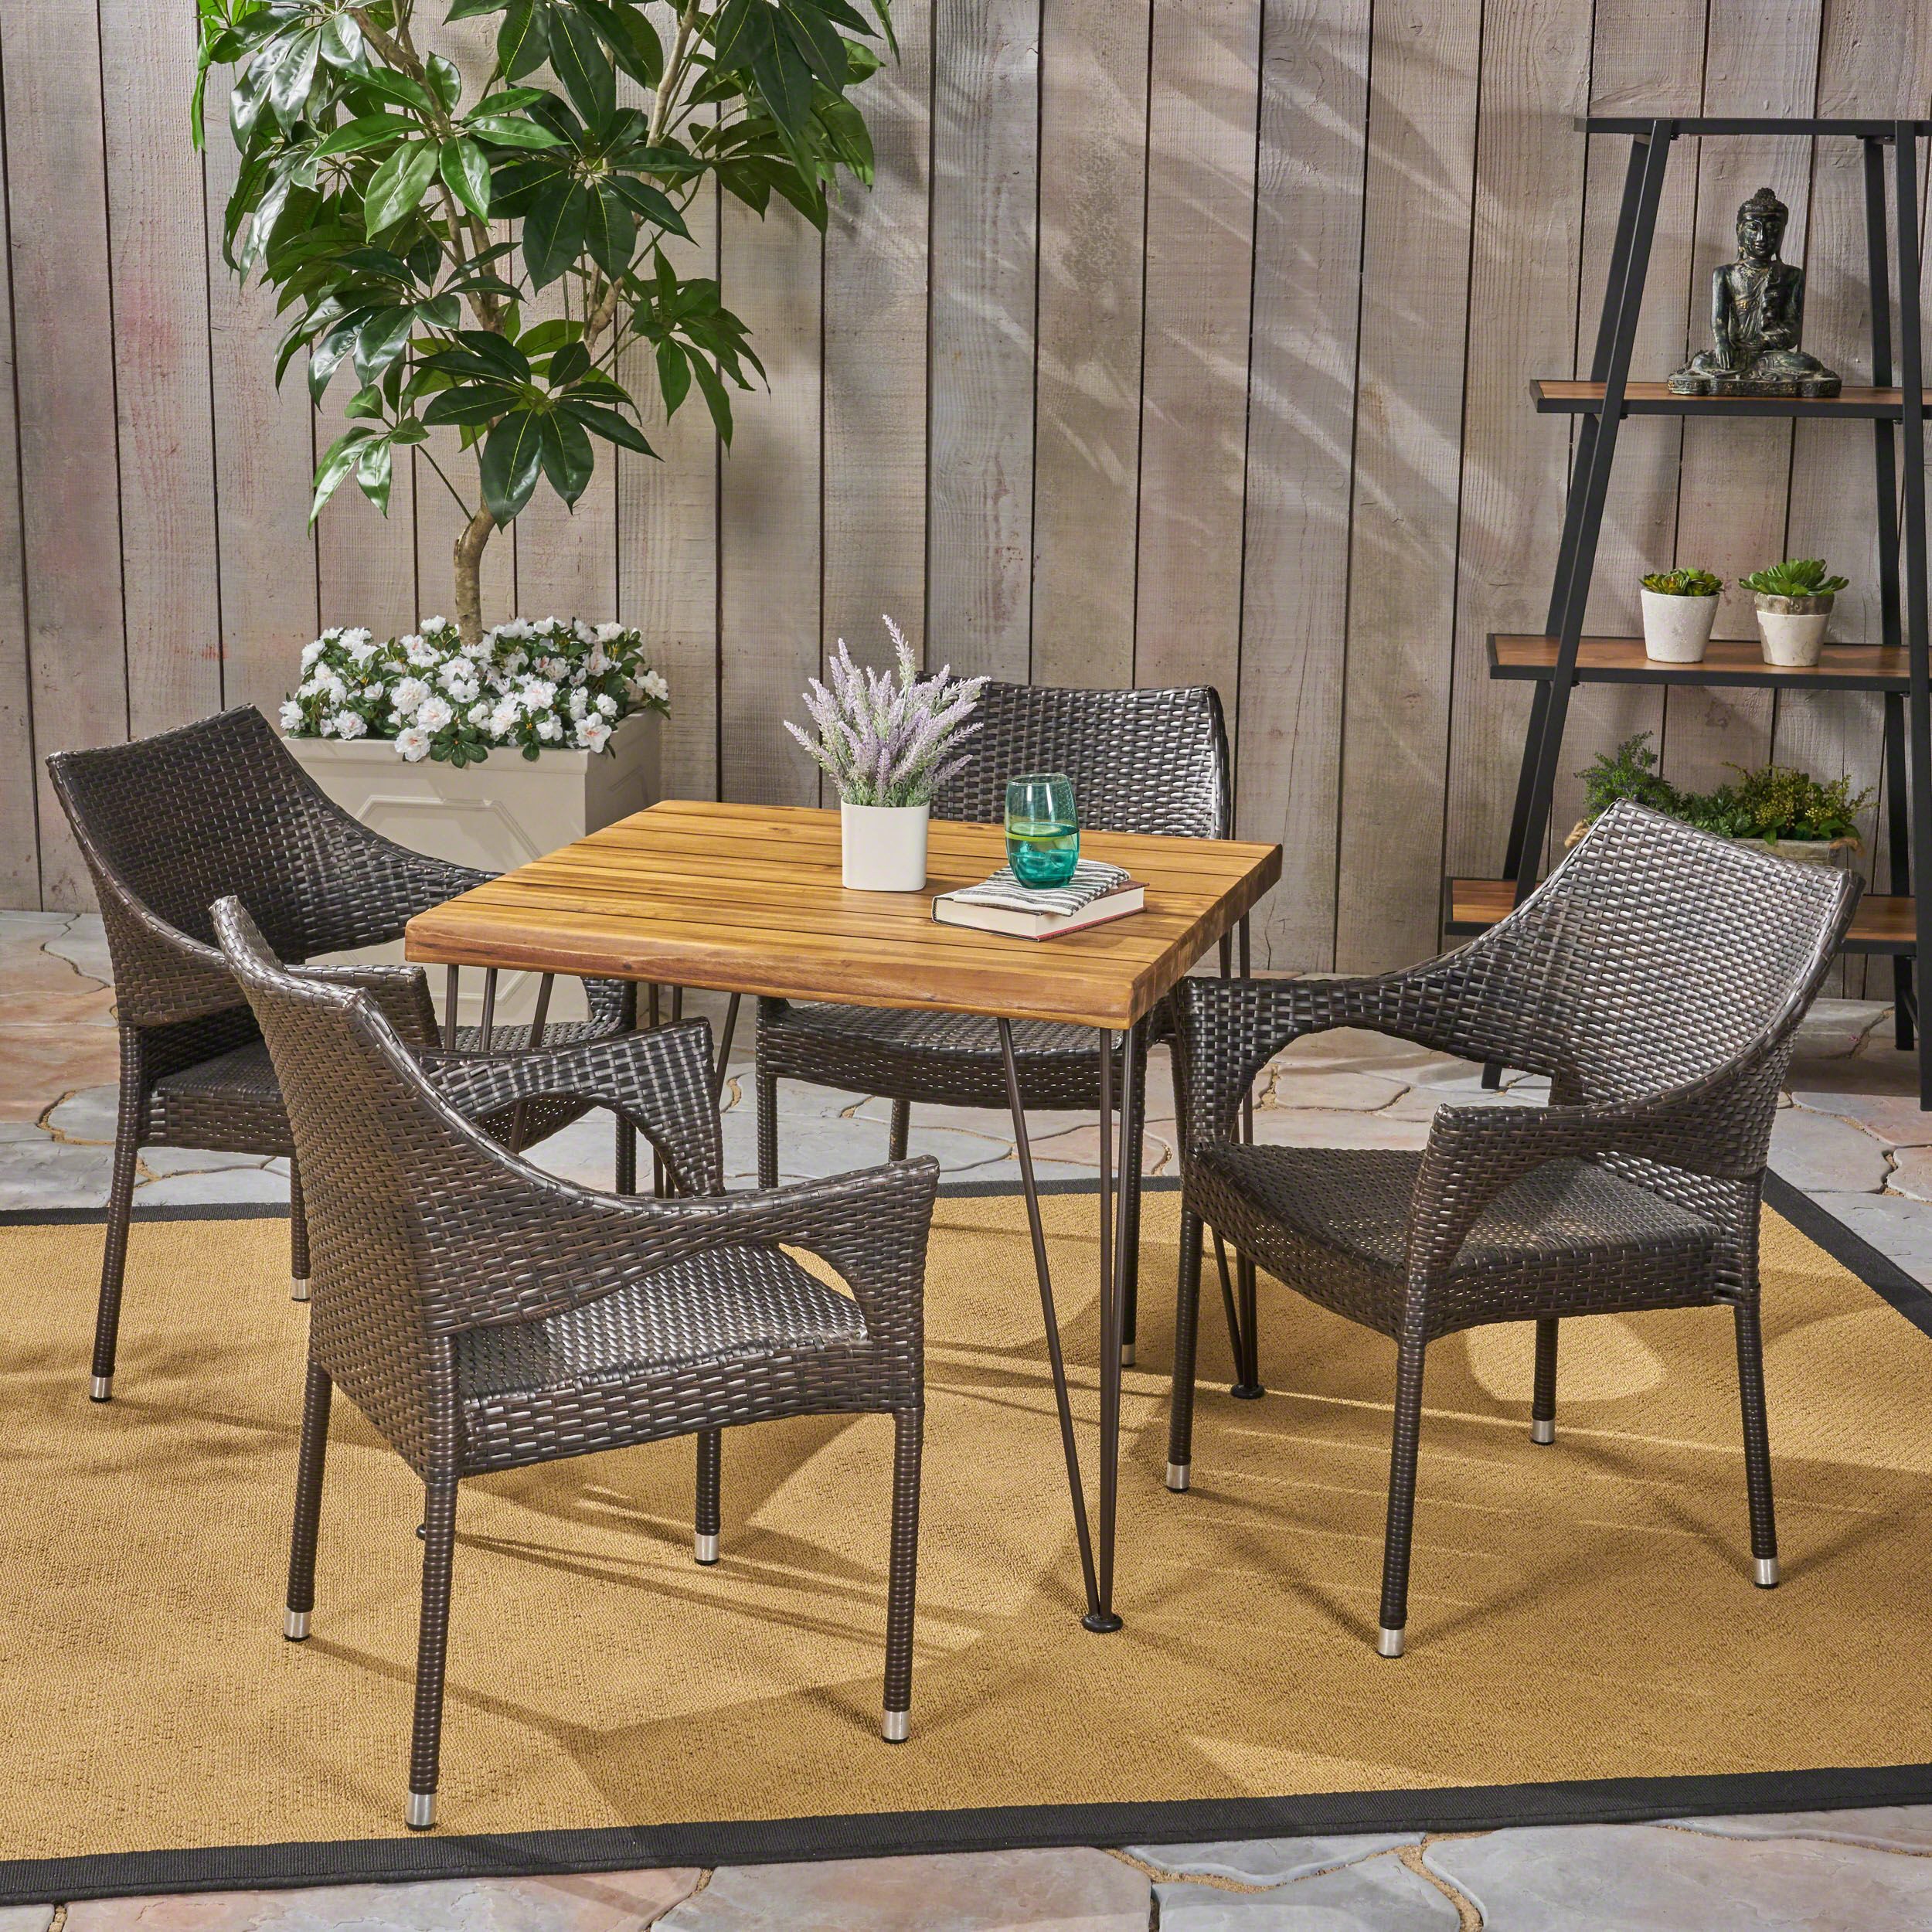 Arya Outdoor 5 Piece Industrial Wood And Wicker Square Dining Set Intended For Teak And Wicker Dining Sets (View 5 of 15)